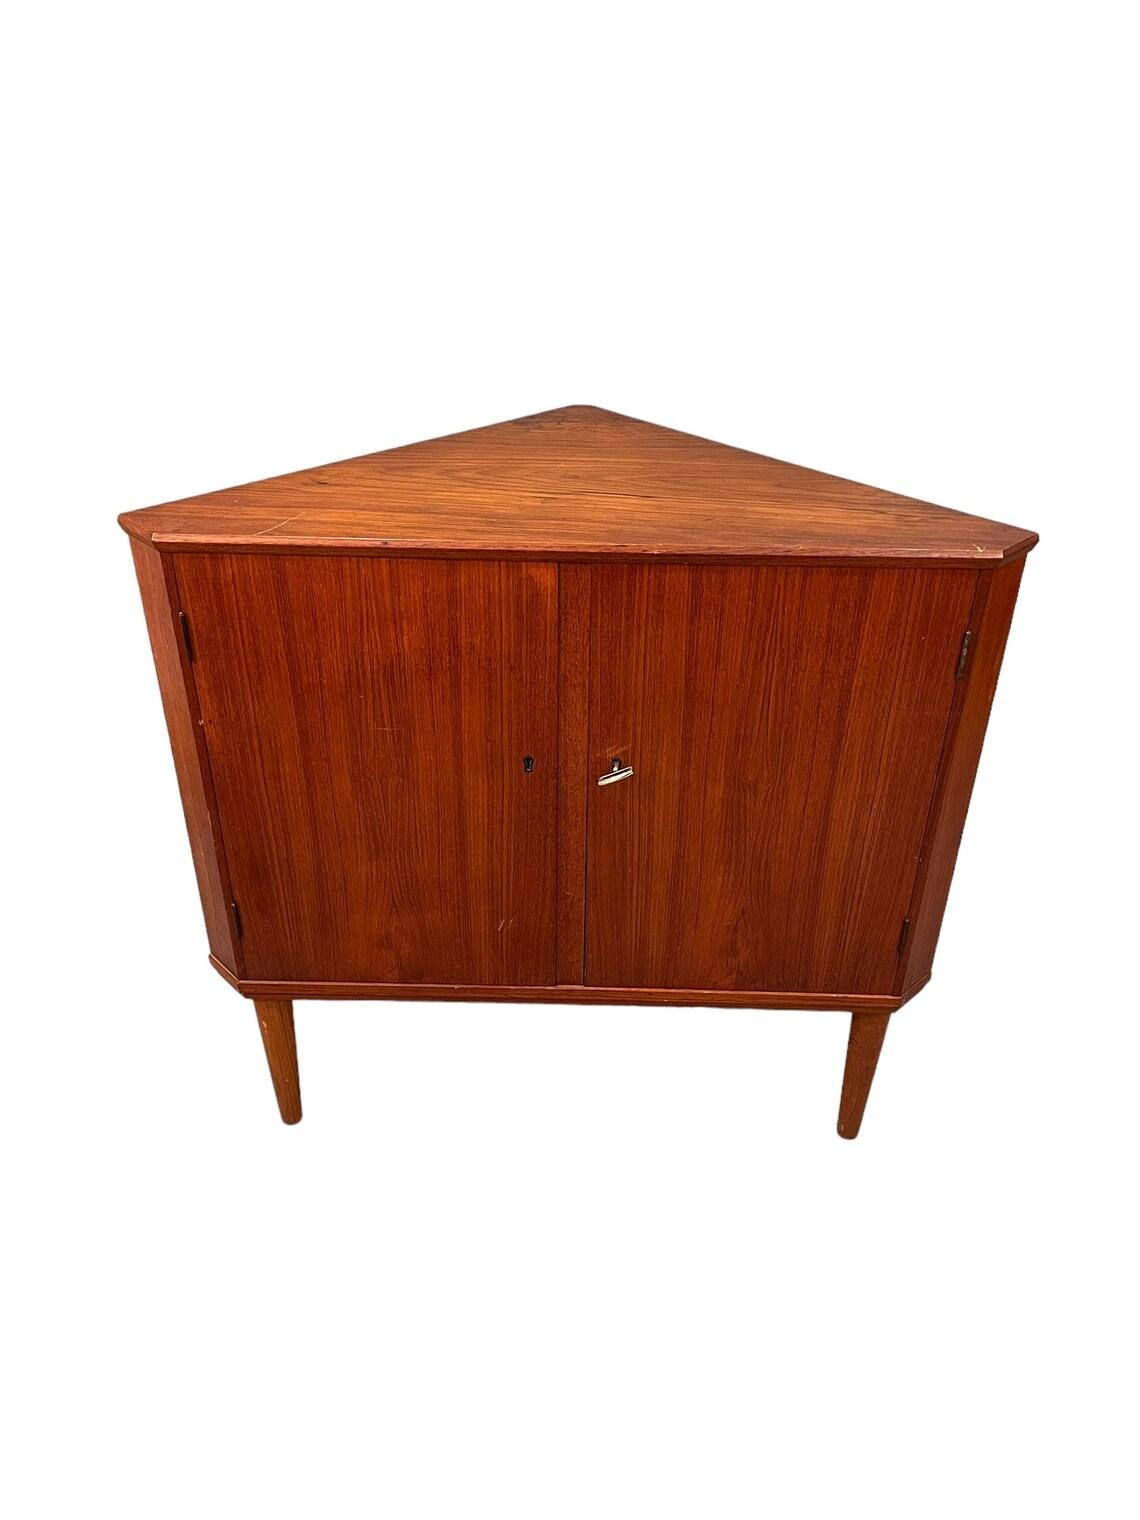 W35.5 x D19.5 x 33.5 inches 

This elegant corner cabinet is a unique piece of furniture that will add character to any room. Made from high-quality teak. It is a stunning showcase for your favorite antiques and collectibles. Its sleek design is